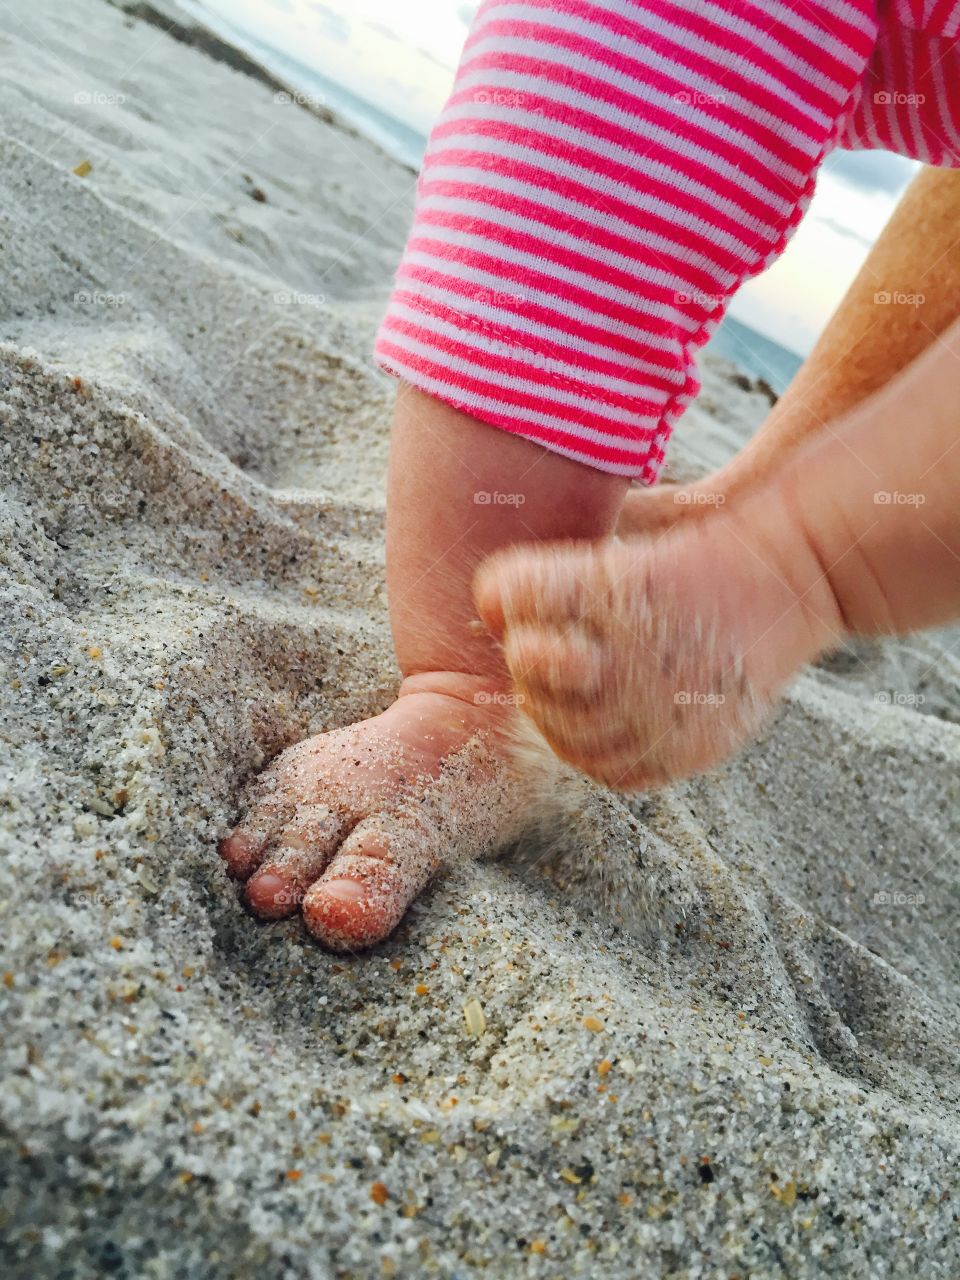 Baby feet. A baby walking in the sand